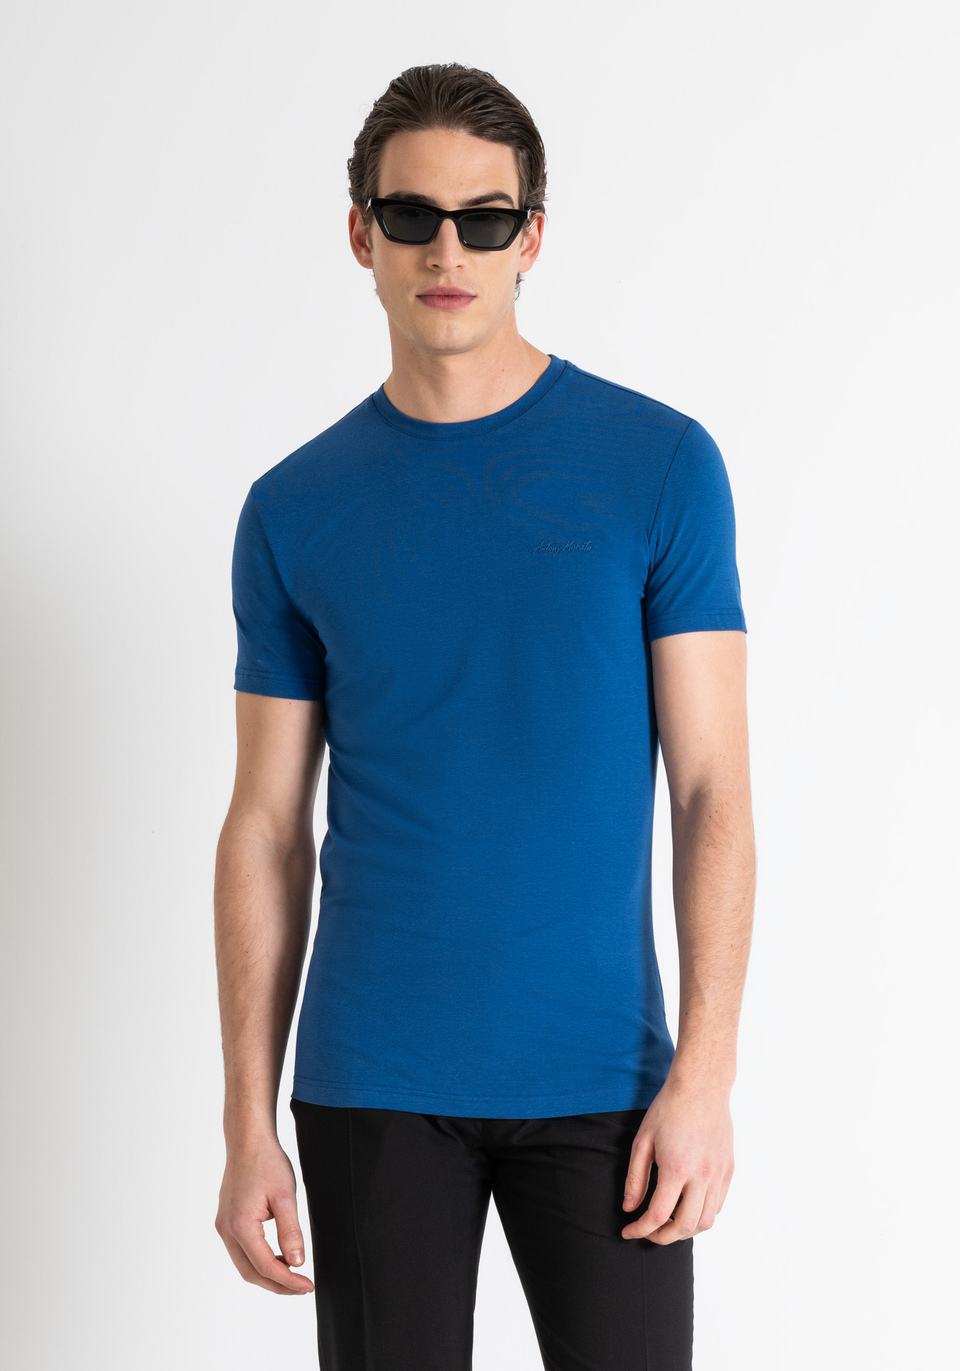 SUPER SLIM FIT T-SHIRT IN STRETCH COTTON MODAL FABRIC WITH RUBBER INJECTED LOGO PRINT - Antony Morato Online Shop